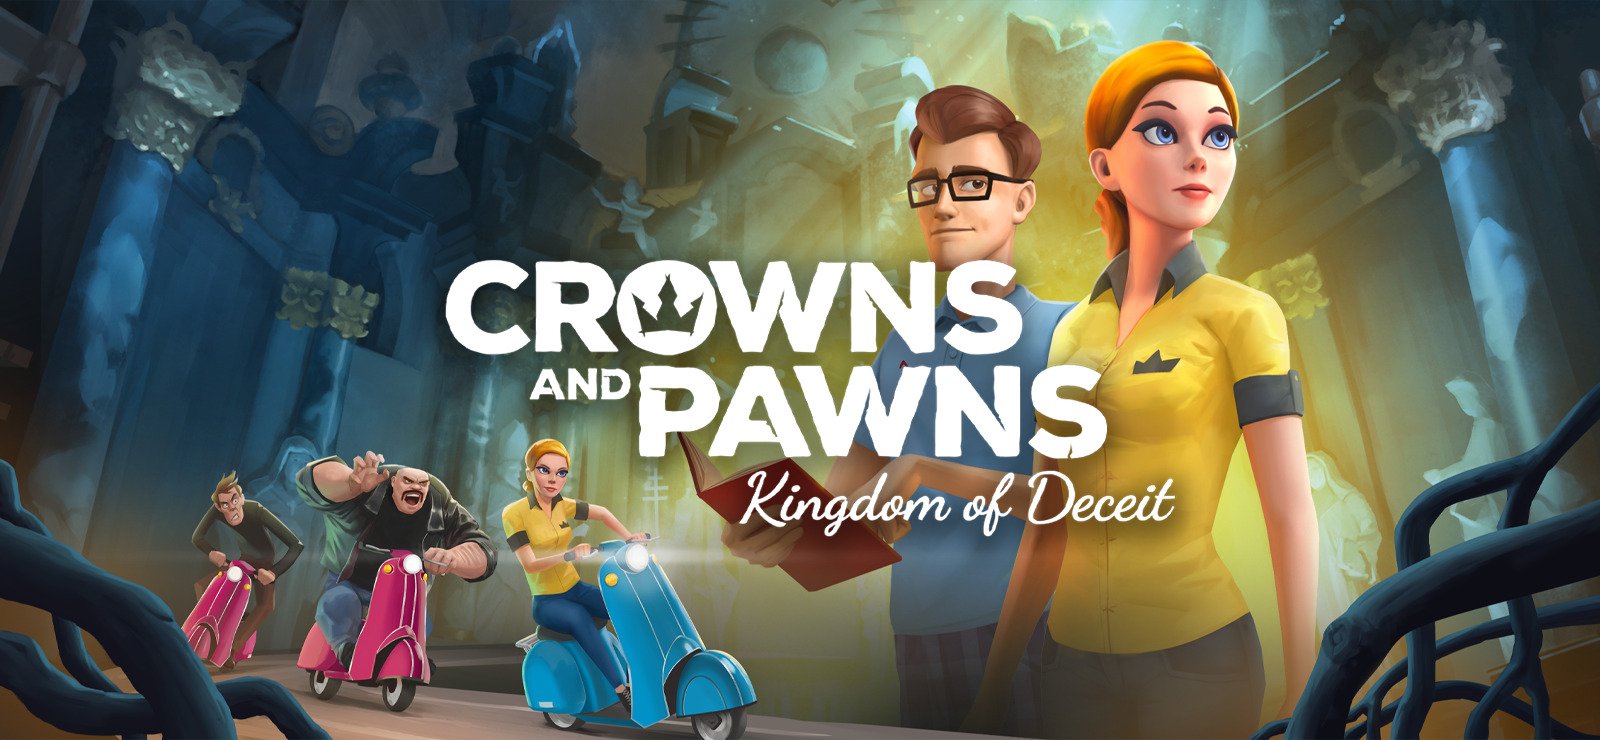 Crowns and Pawns Kingdom of Deceit 14